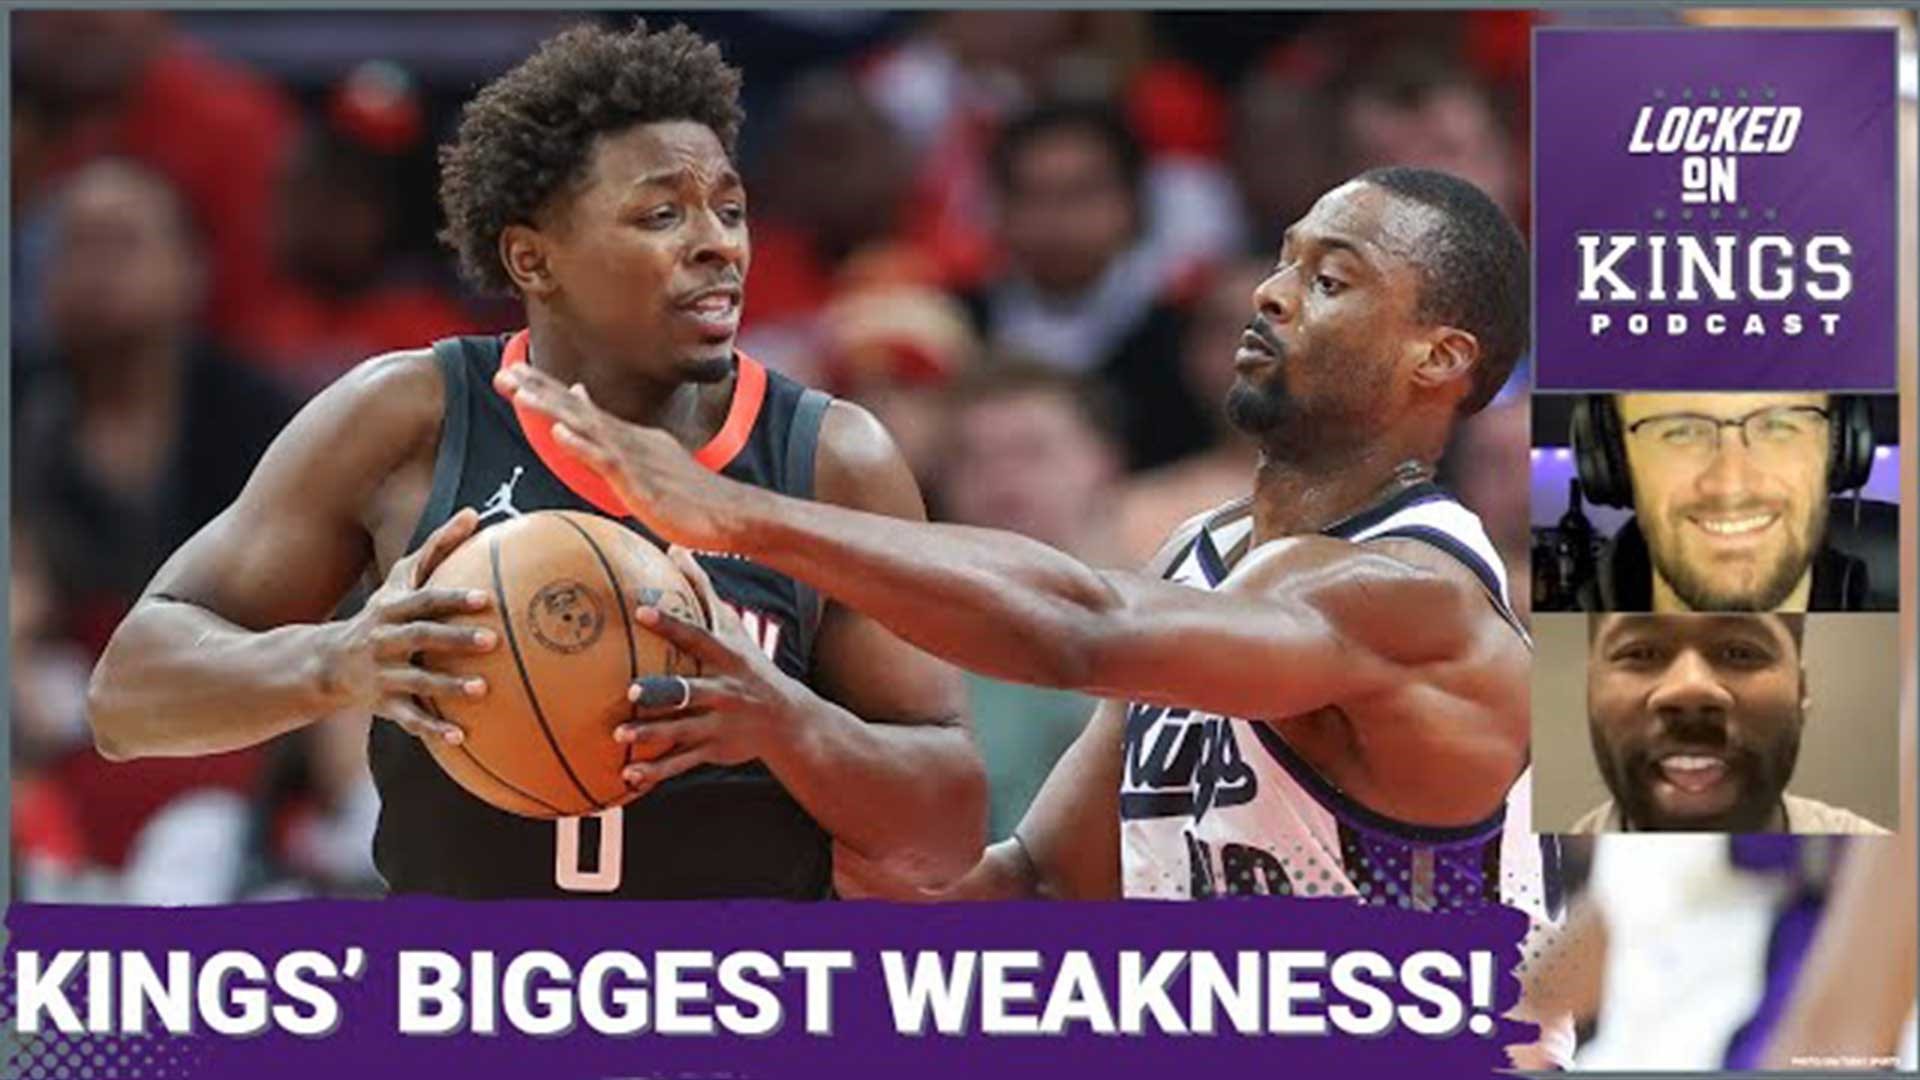 Matt George is joined by Sactown Sports 1140 radio host Allen Stiles to discuss Harrison Barnes, Keegan Murray, and the current biggest weakness.